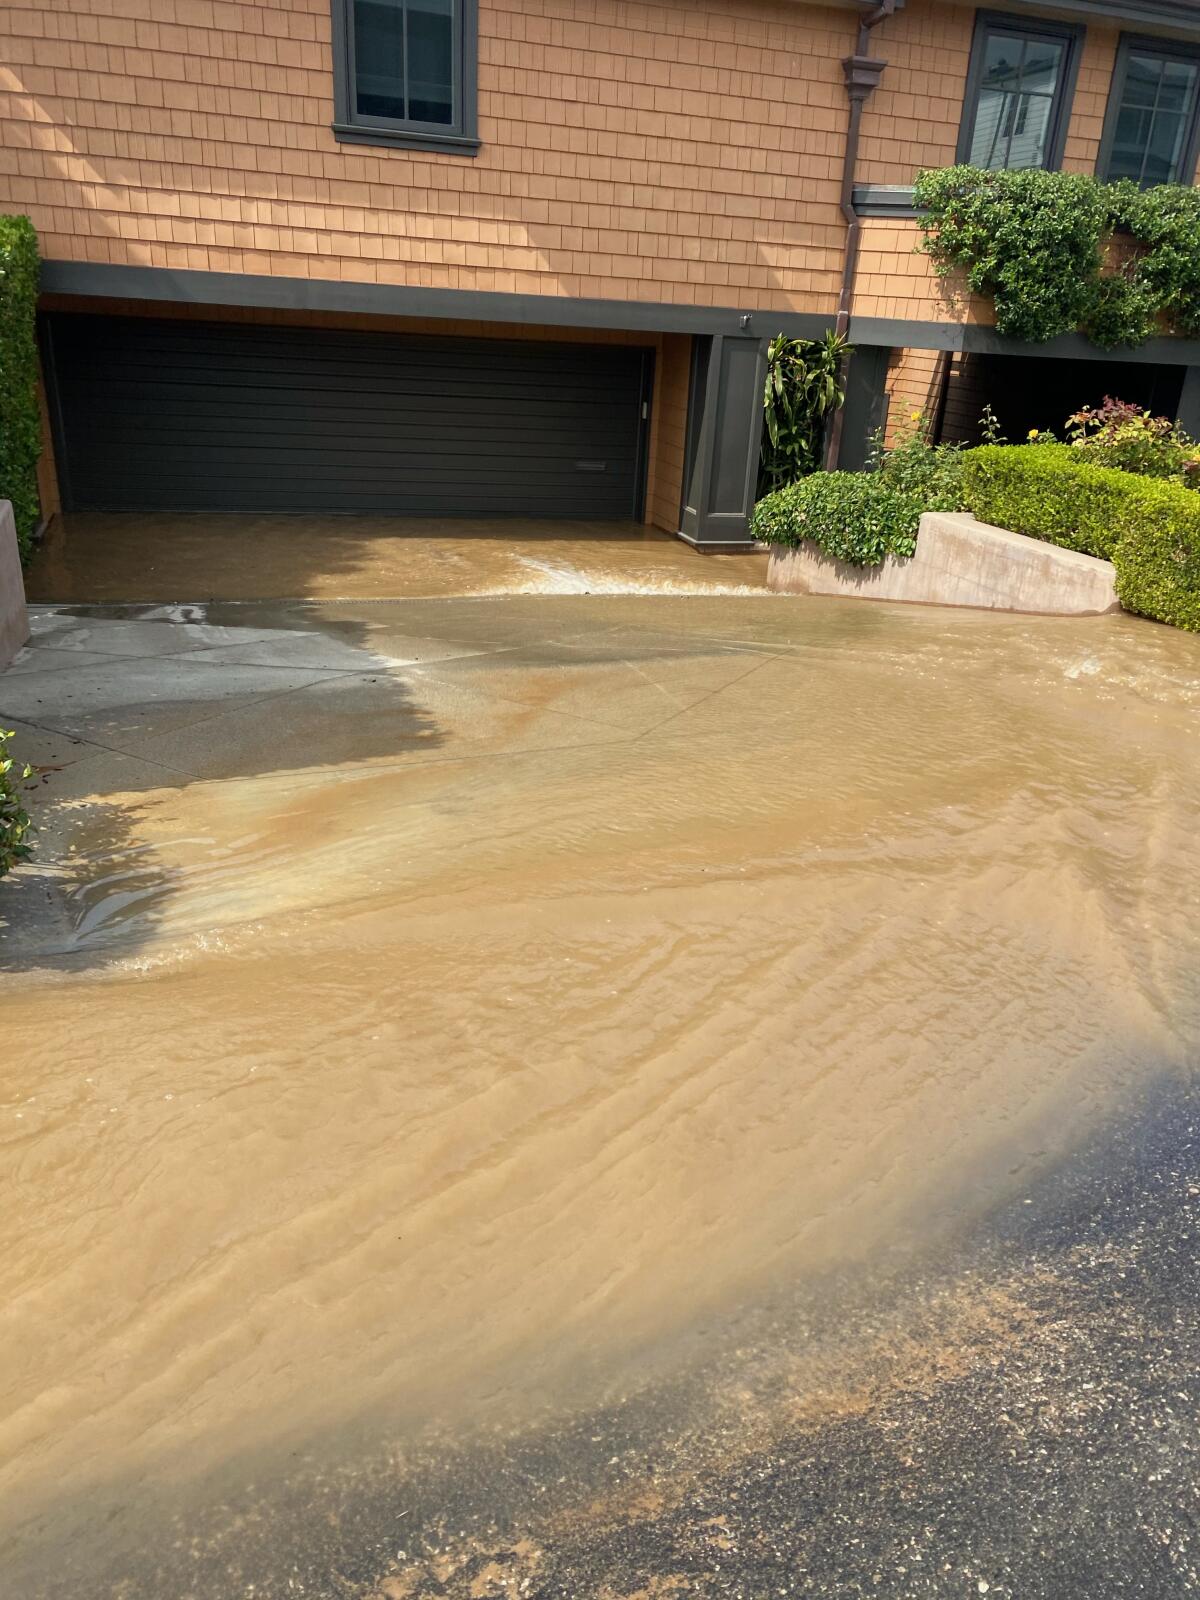 The driveway of the Senks' home was flooded after a water main owned by the city broke.